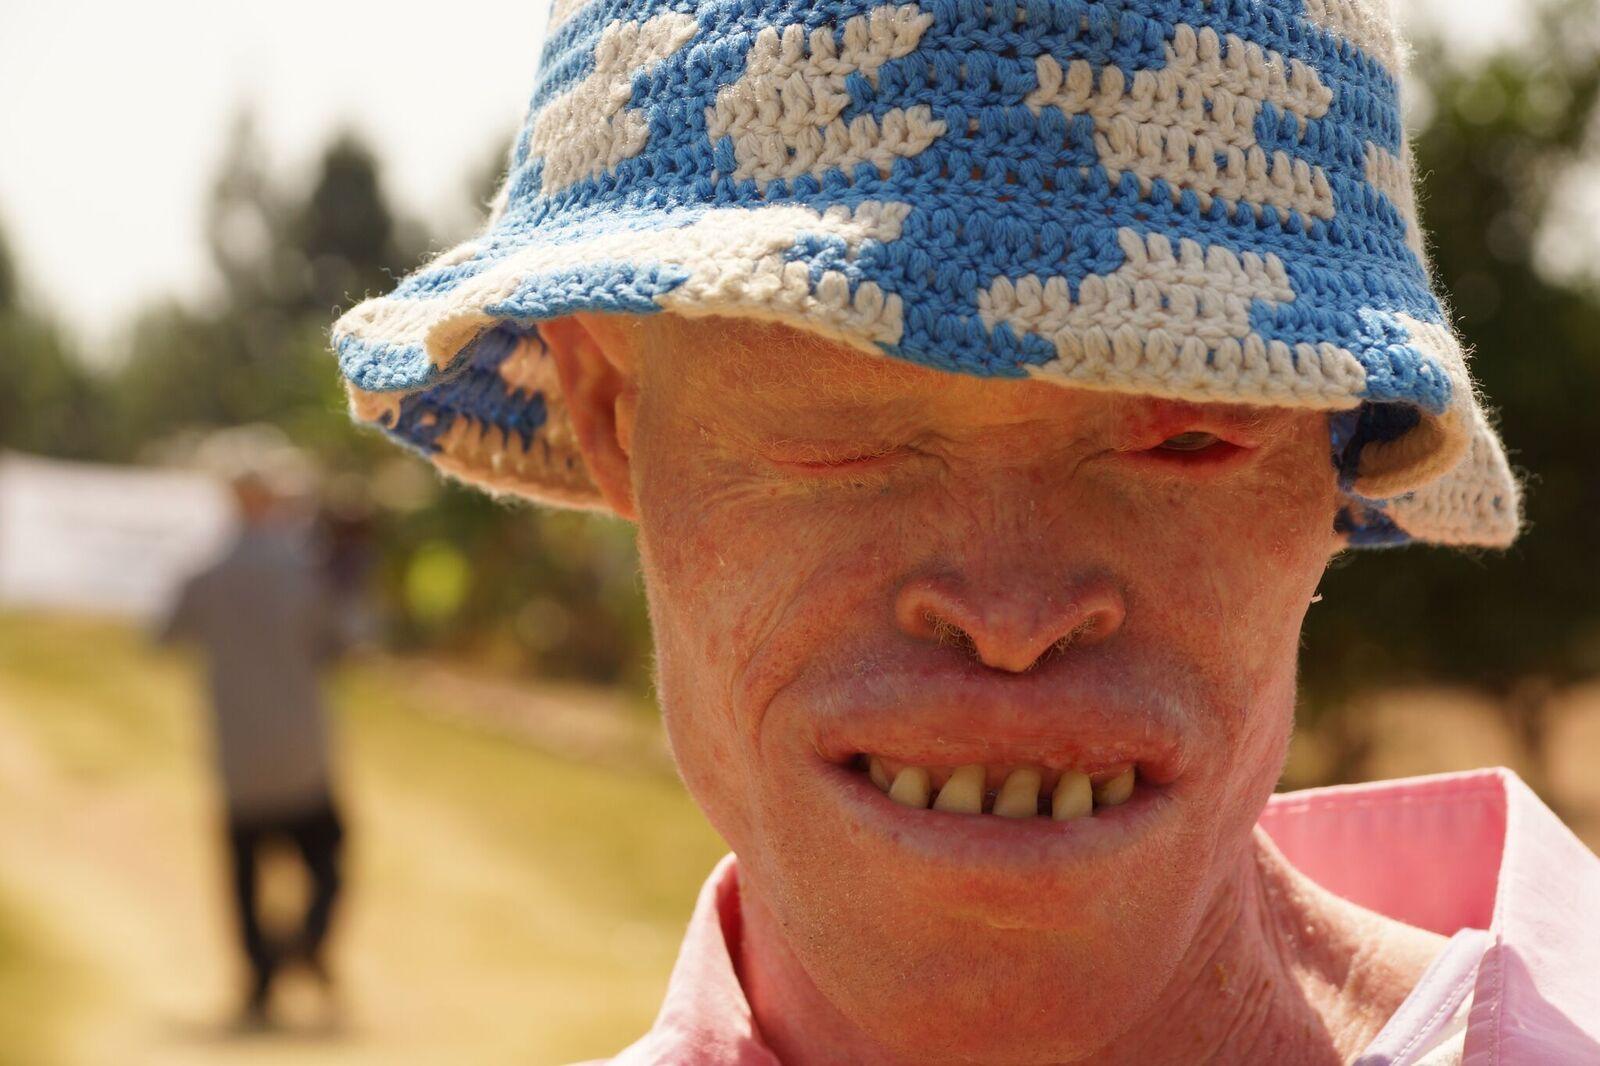 Musa of the Tanzania Albinism Collective